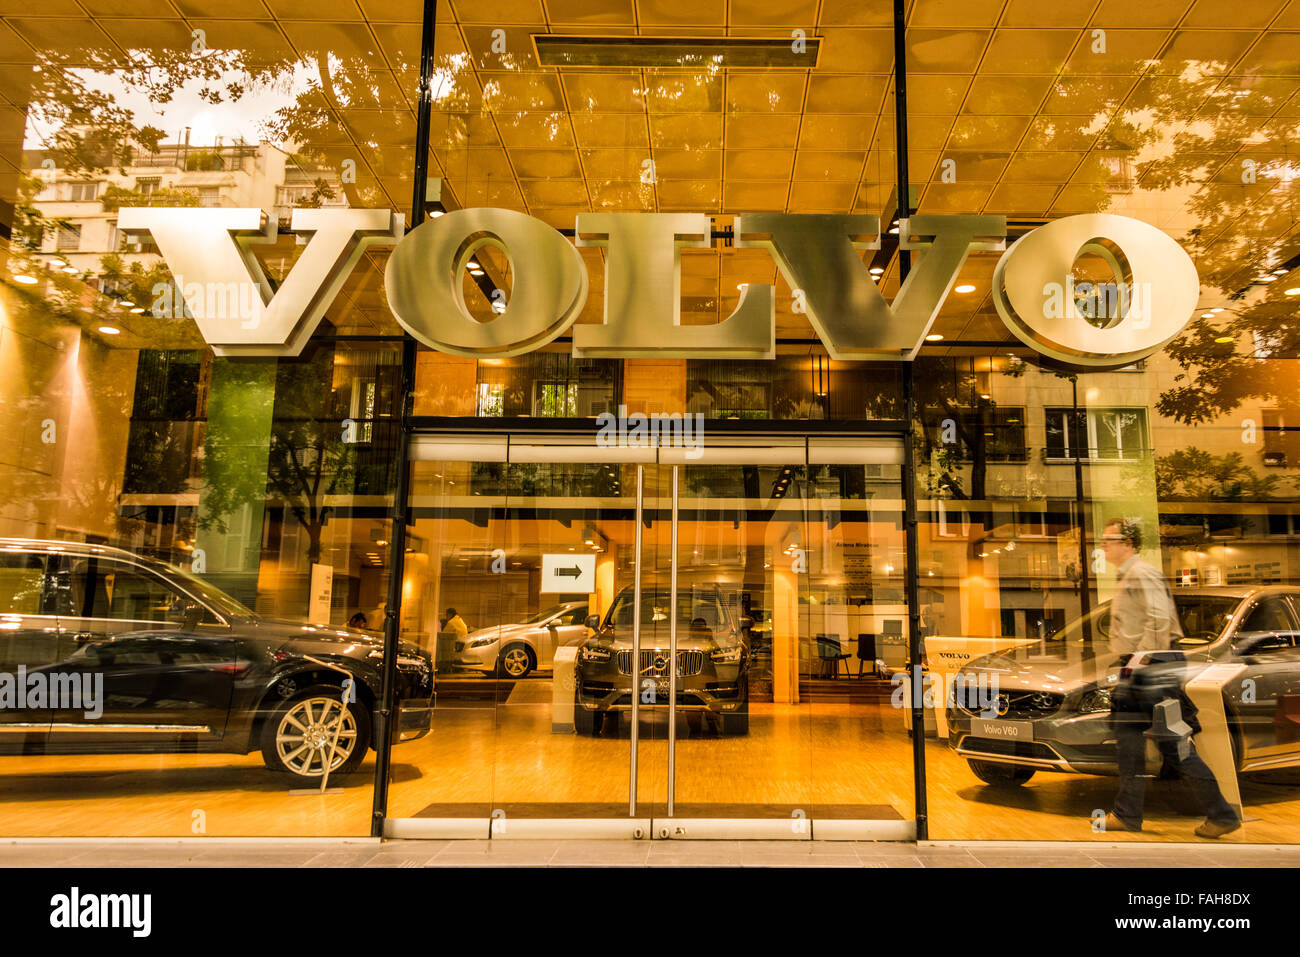 A Volvo Showroom in the  European City of Paris In France Stock Photo